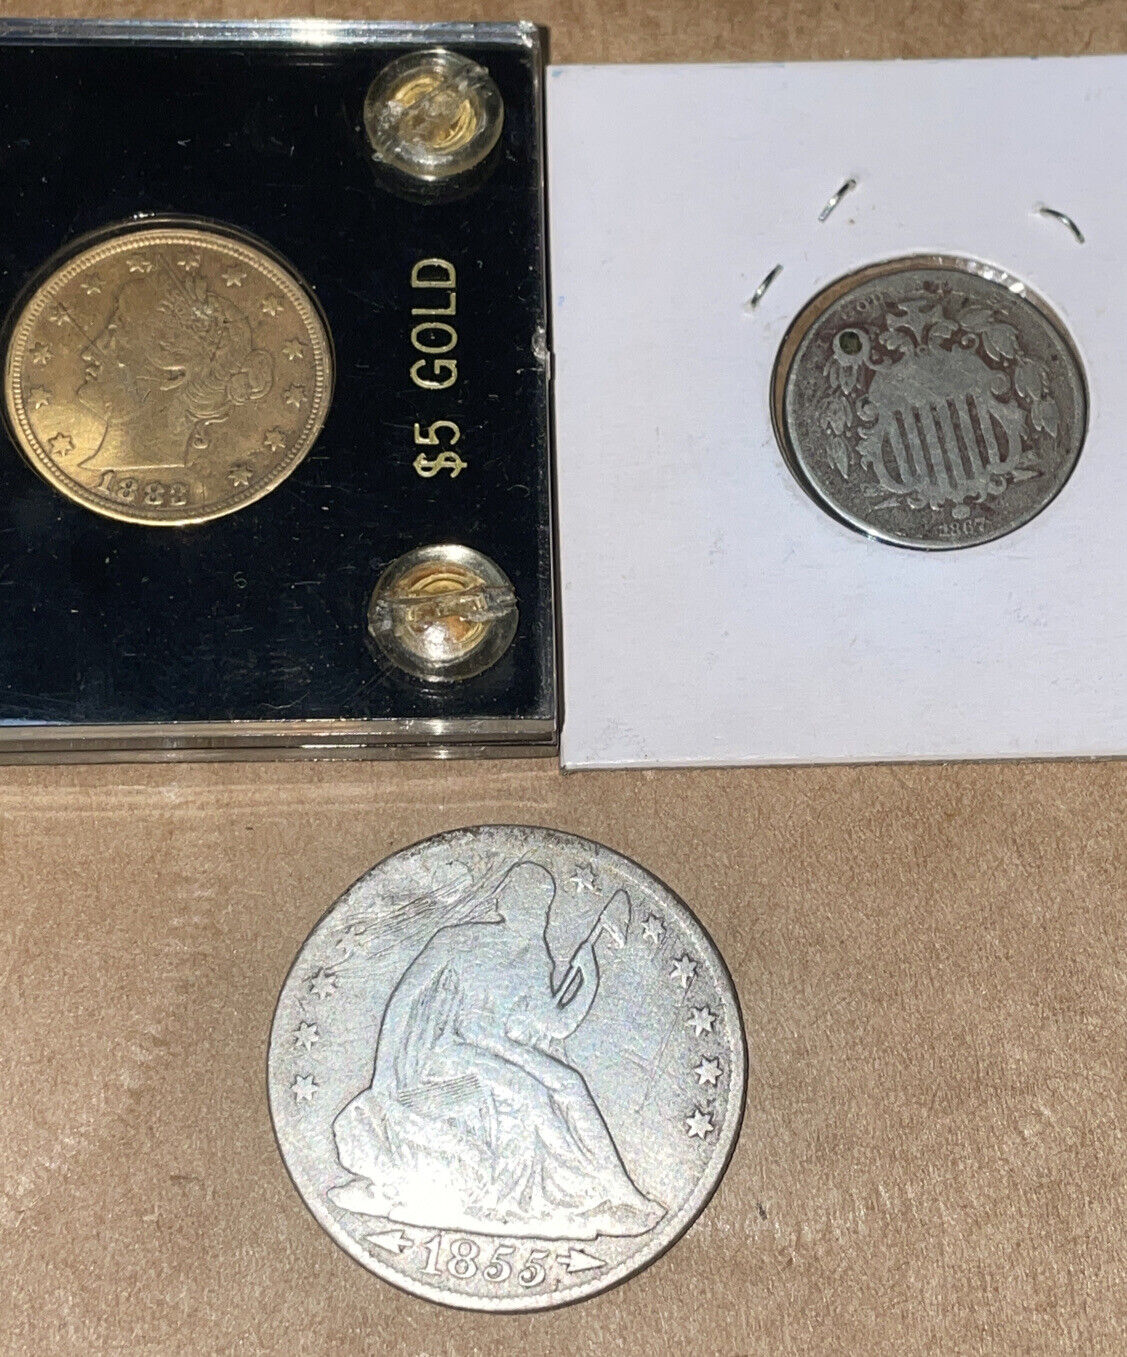 Duffy’s Curious lot: 1883 not gold 5c, 1867 rays 5c holey, 1855 o half$ dmg